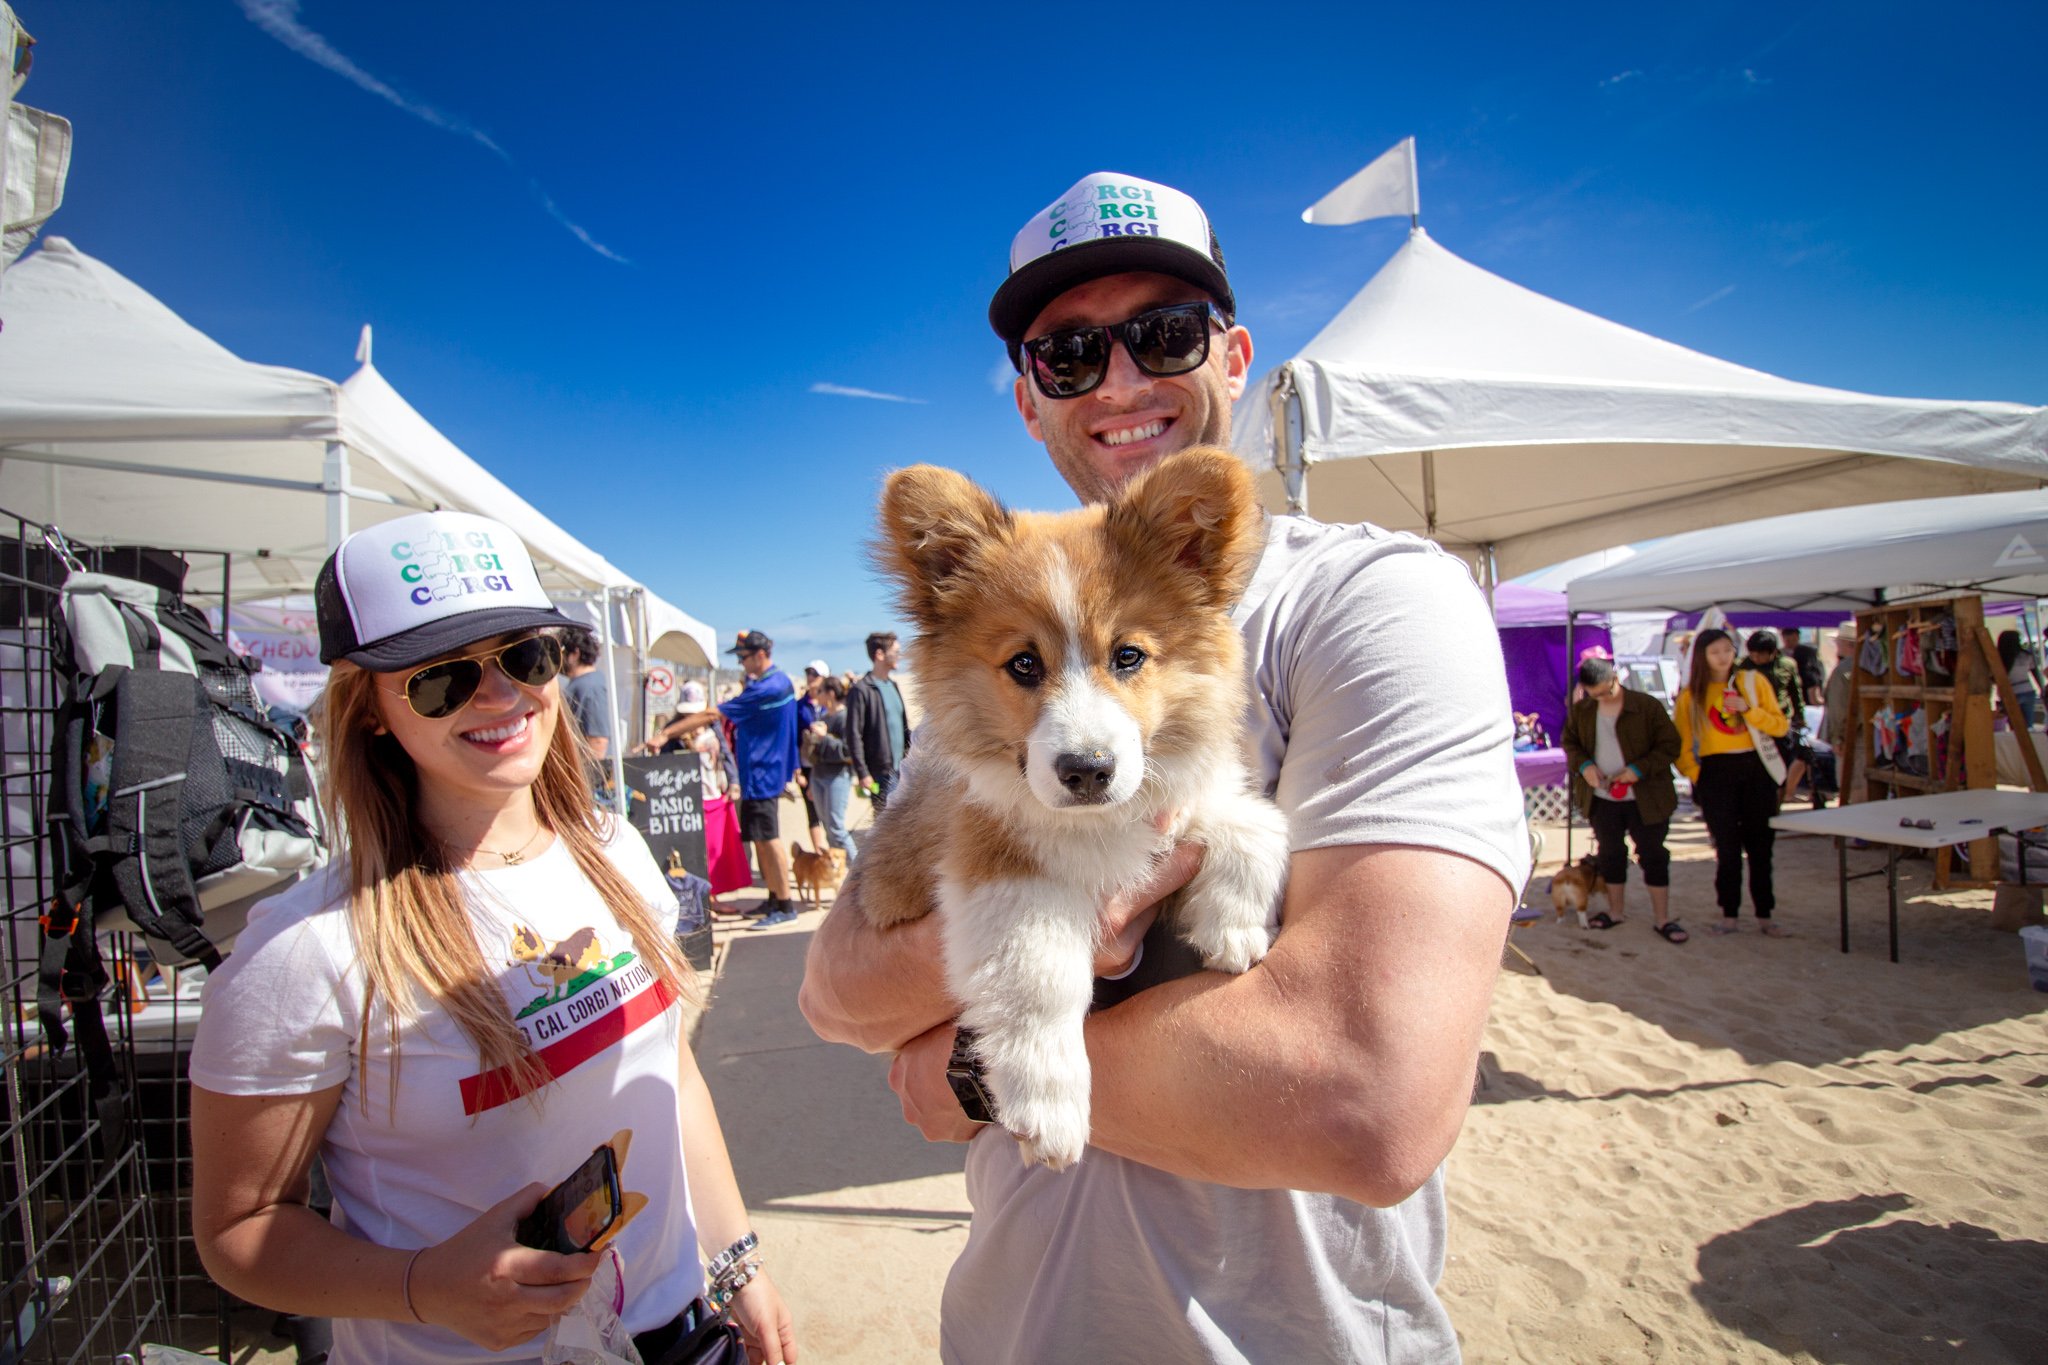 Orange County Pet and Dog Photography - by Steamer Lee - Corgi Beach Day Spring 2019 - Southern Caliornia 67 (1).JPG